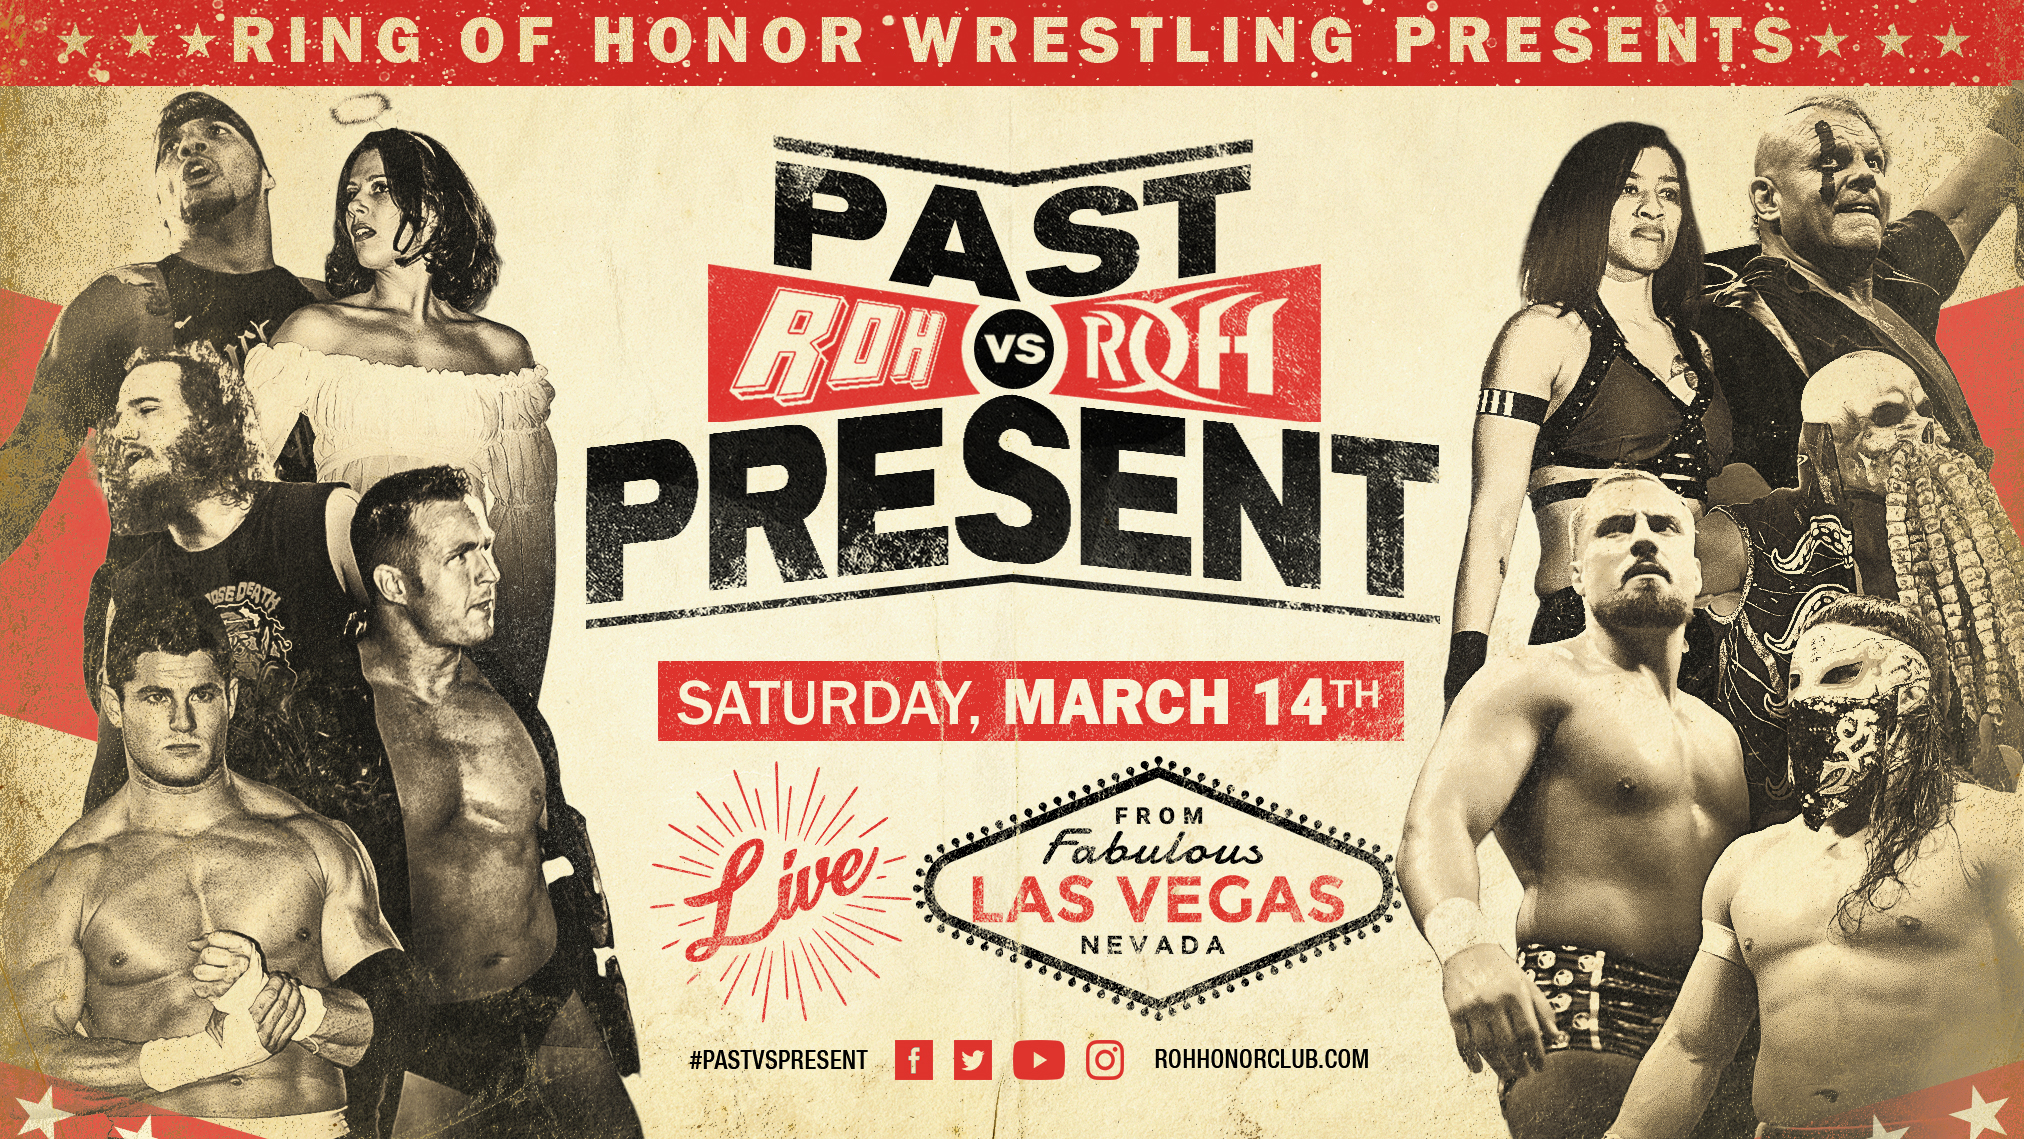 ROH Celebrates 18th Anniversary With Two Big Shows In Las Vegas In March